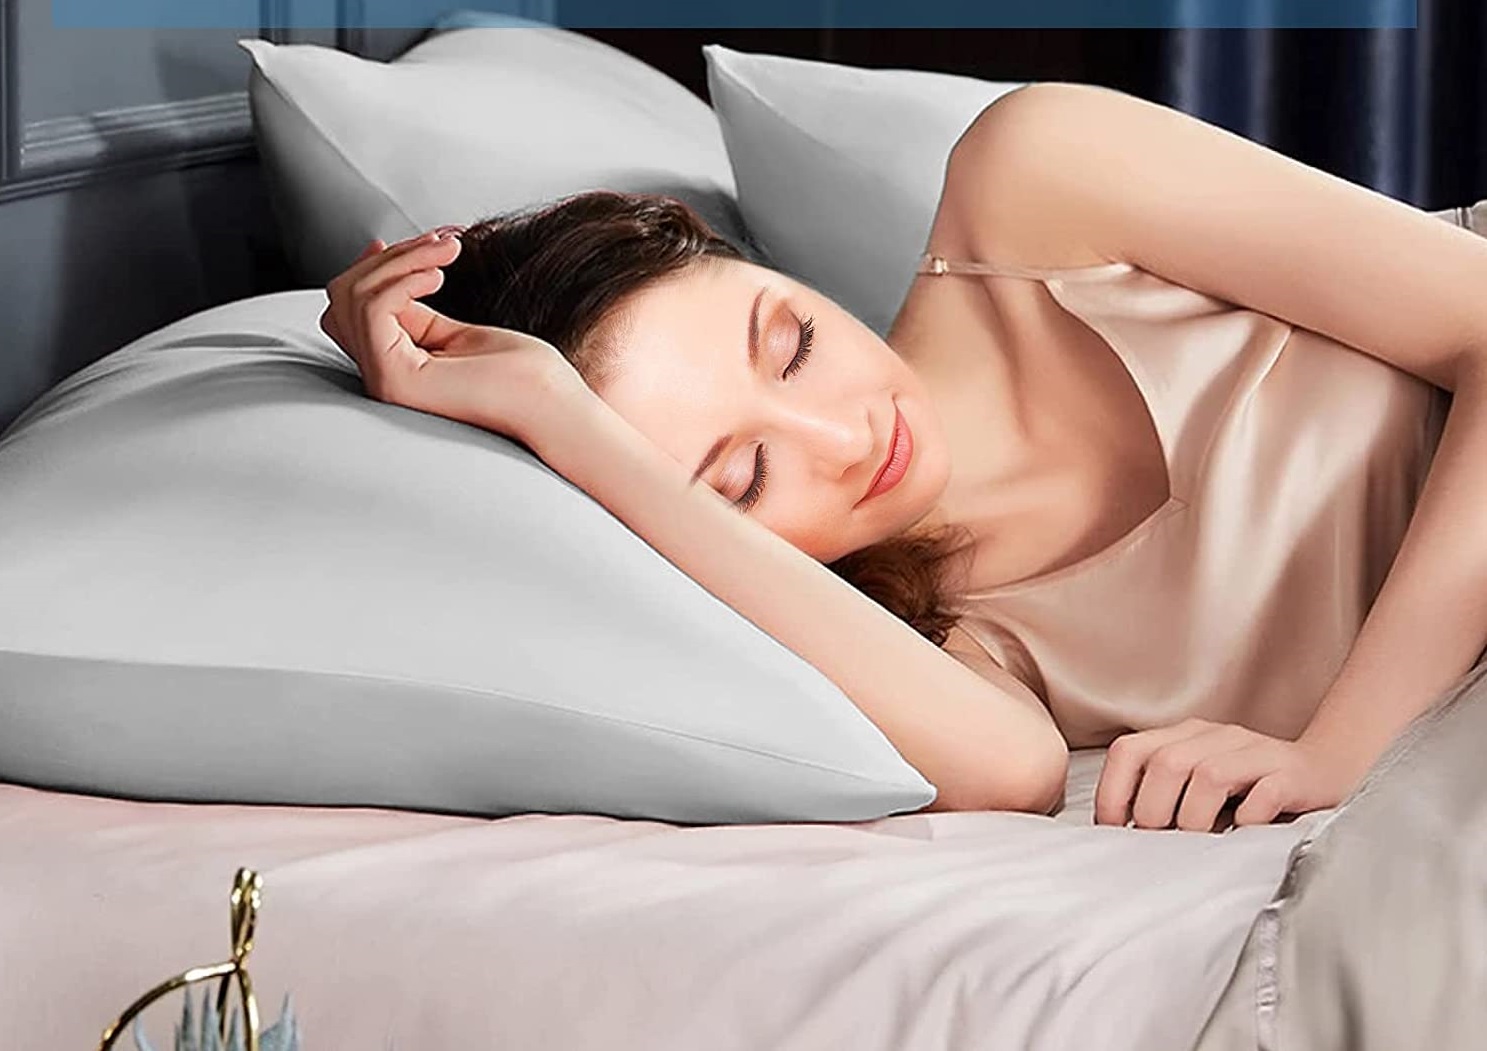 The Avolare Cooling pillowcase